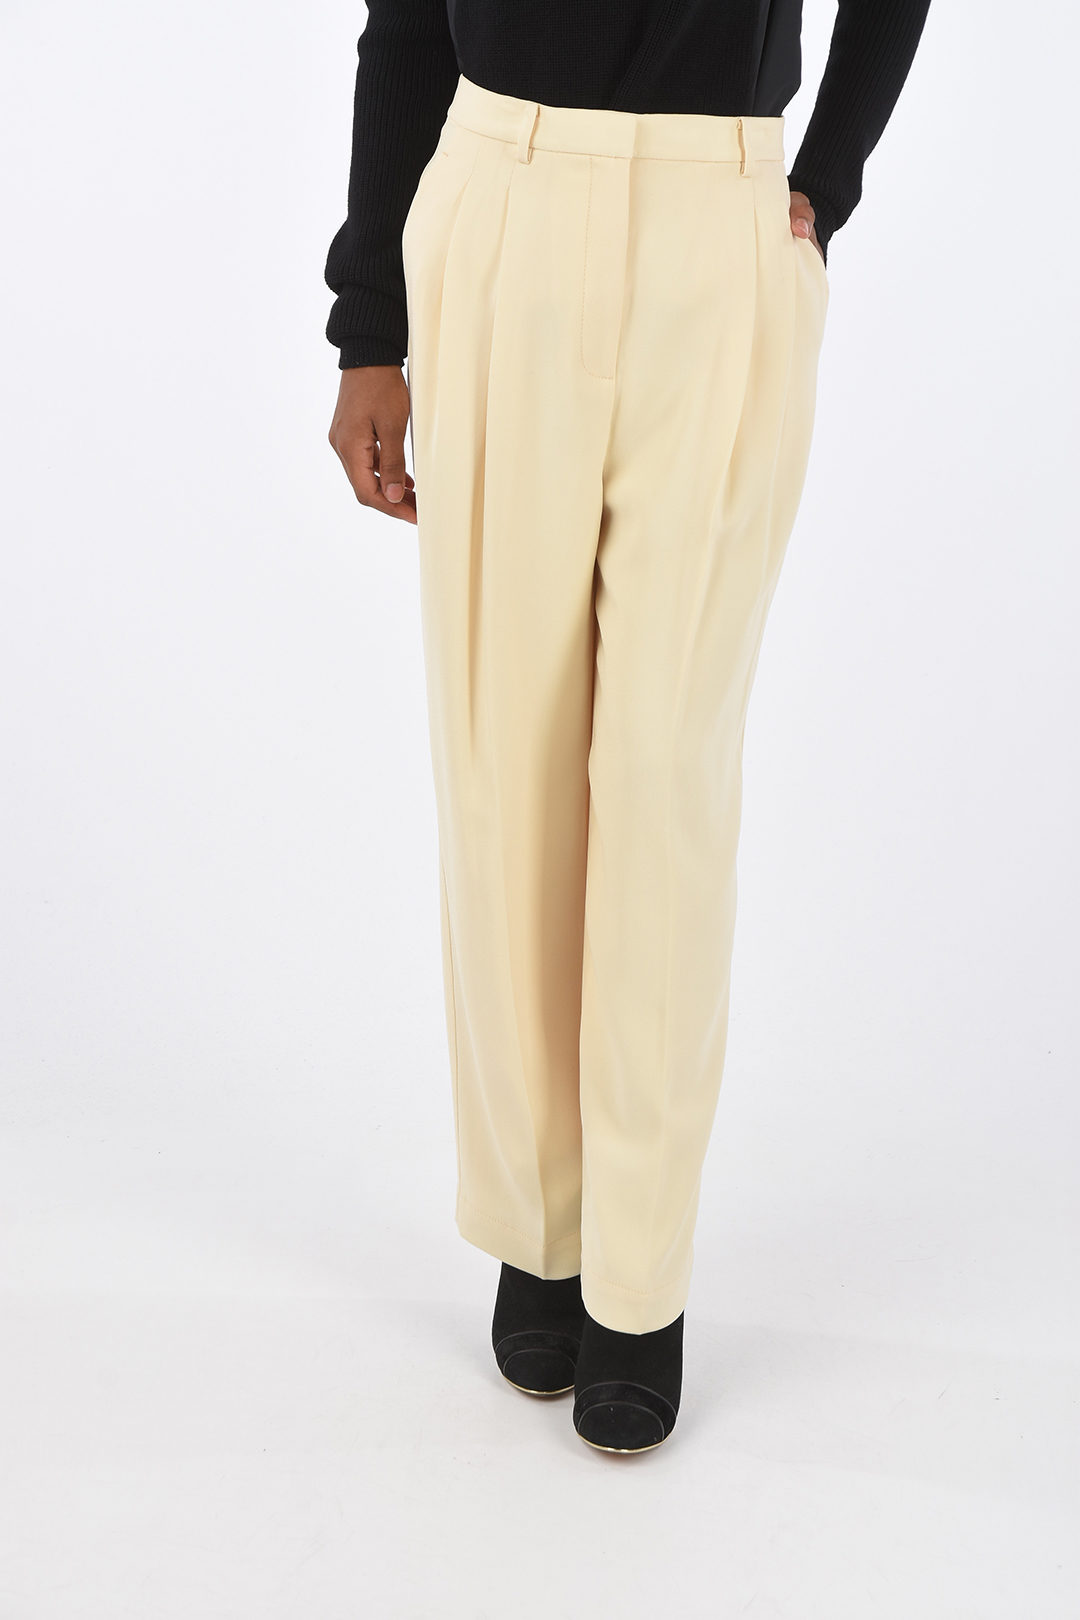 Tory Burch High-waisted Flared Pants in Crepe Effect with Double-pleat  women - Glamood Outlet